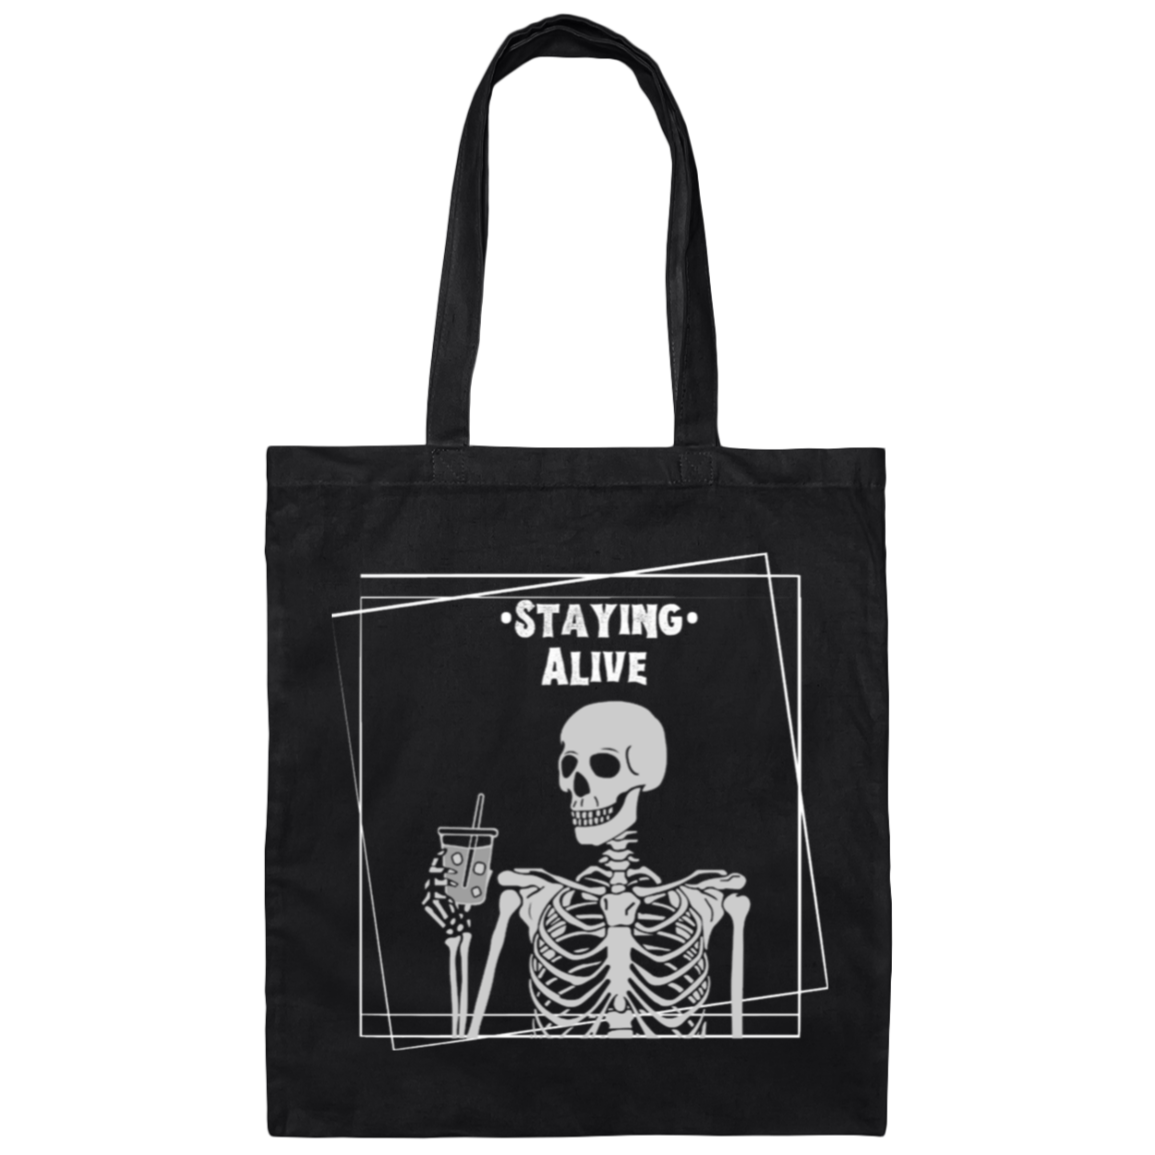 Staying Alive Tote Bag